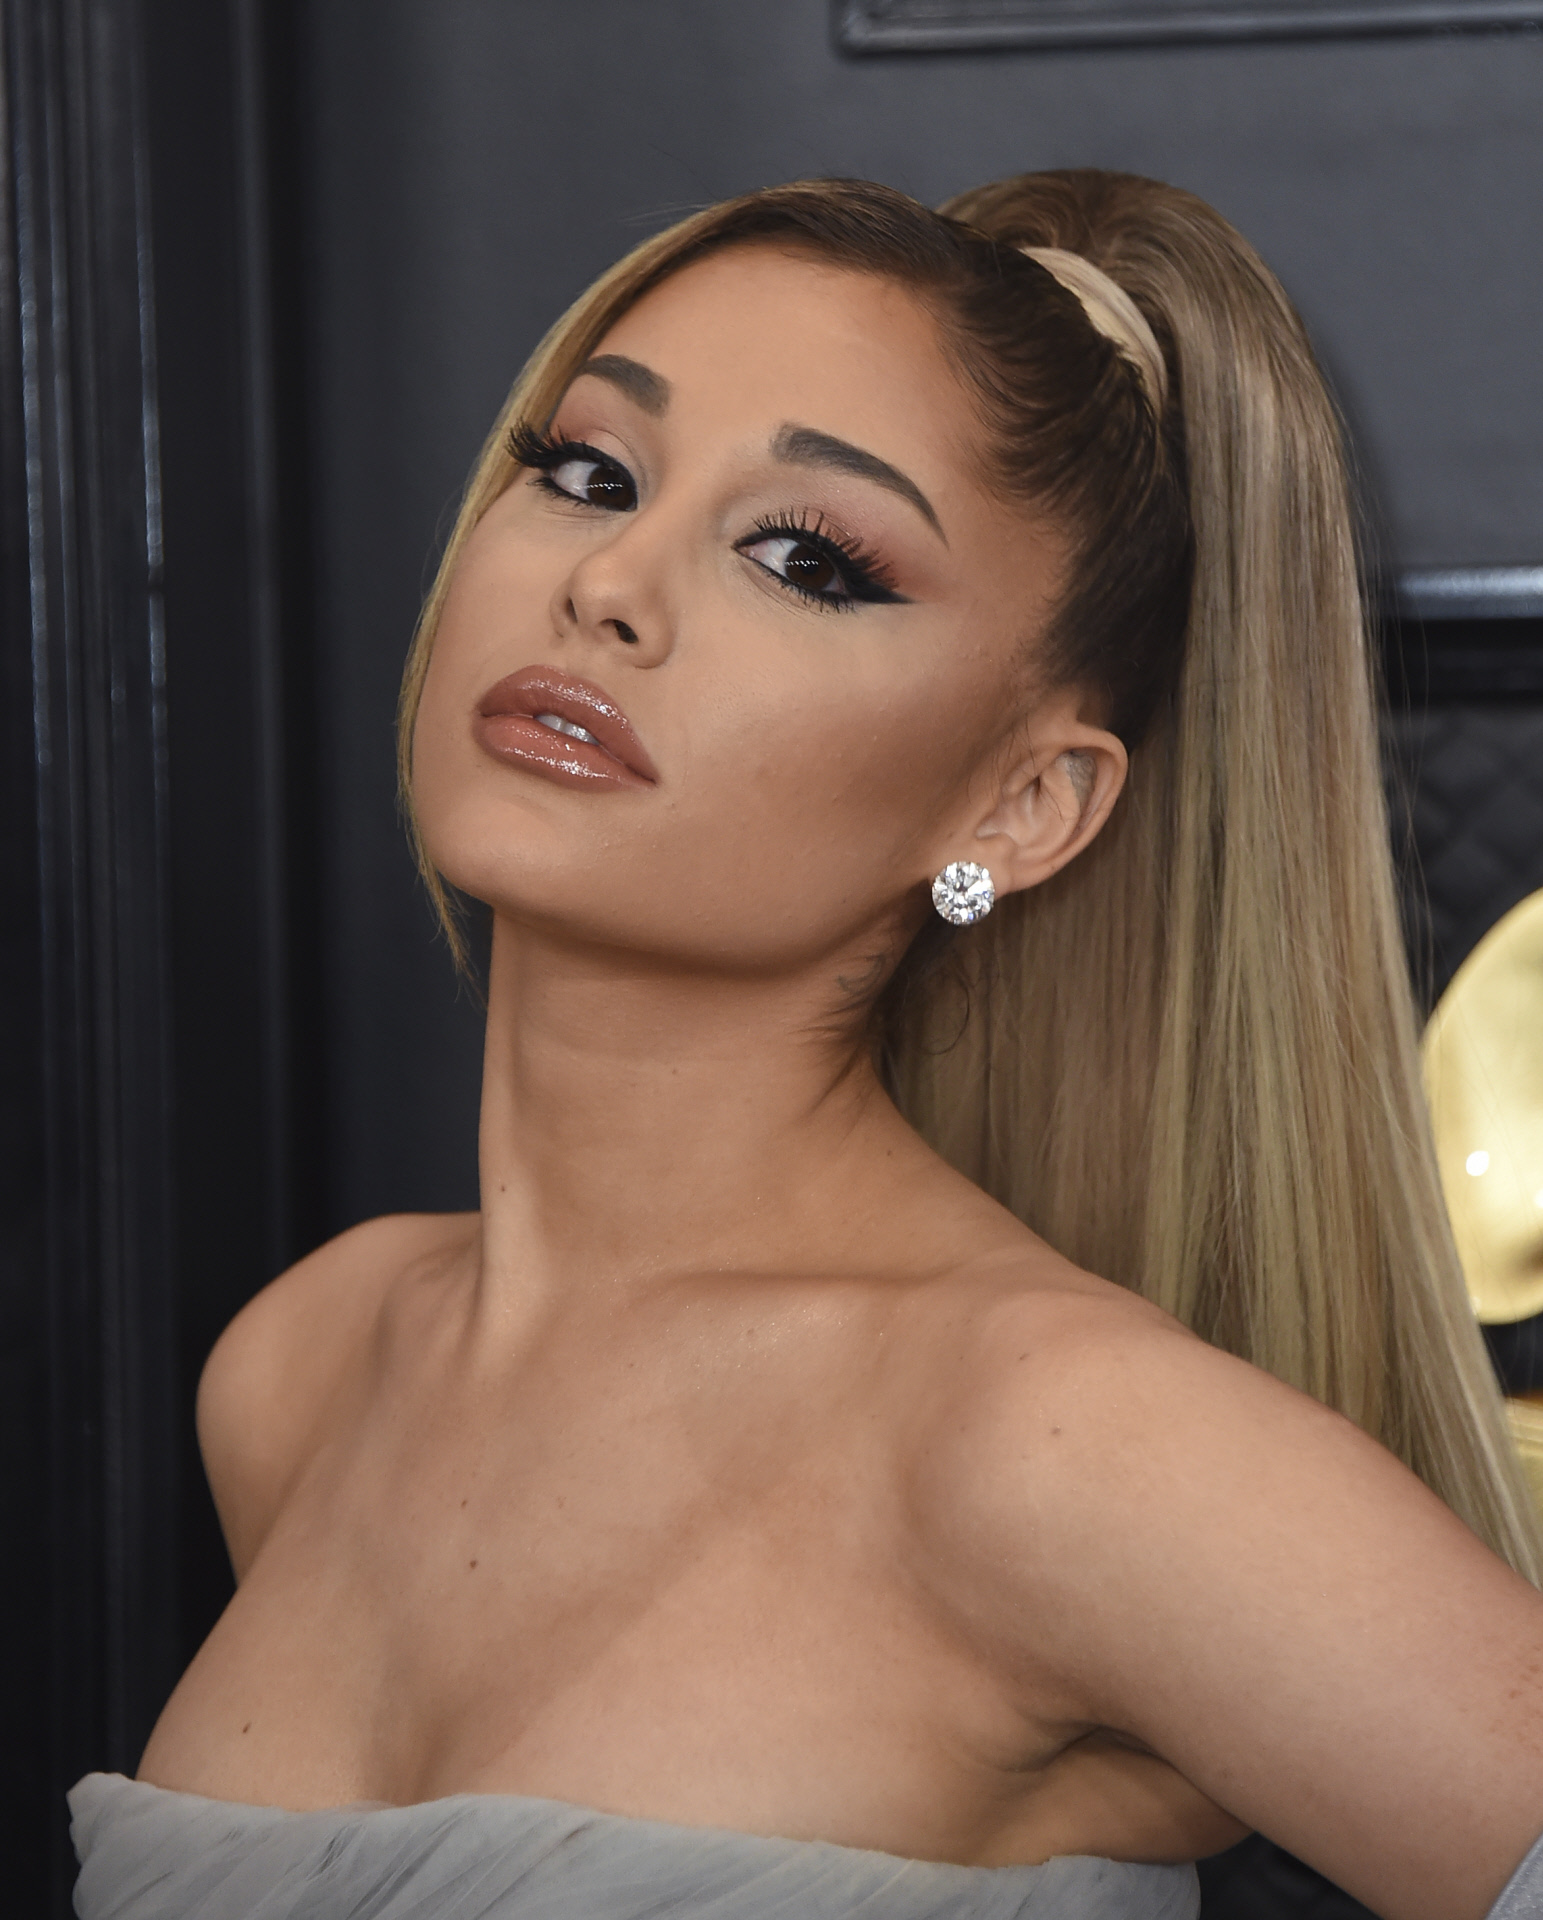 Ariana Grande has made the ponytail 'doll hair' her trademark